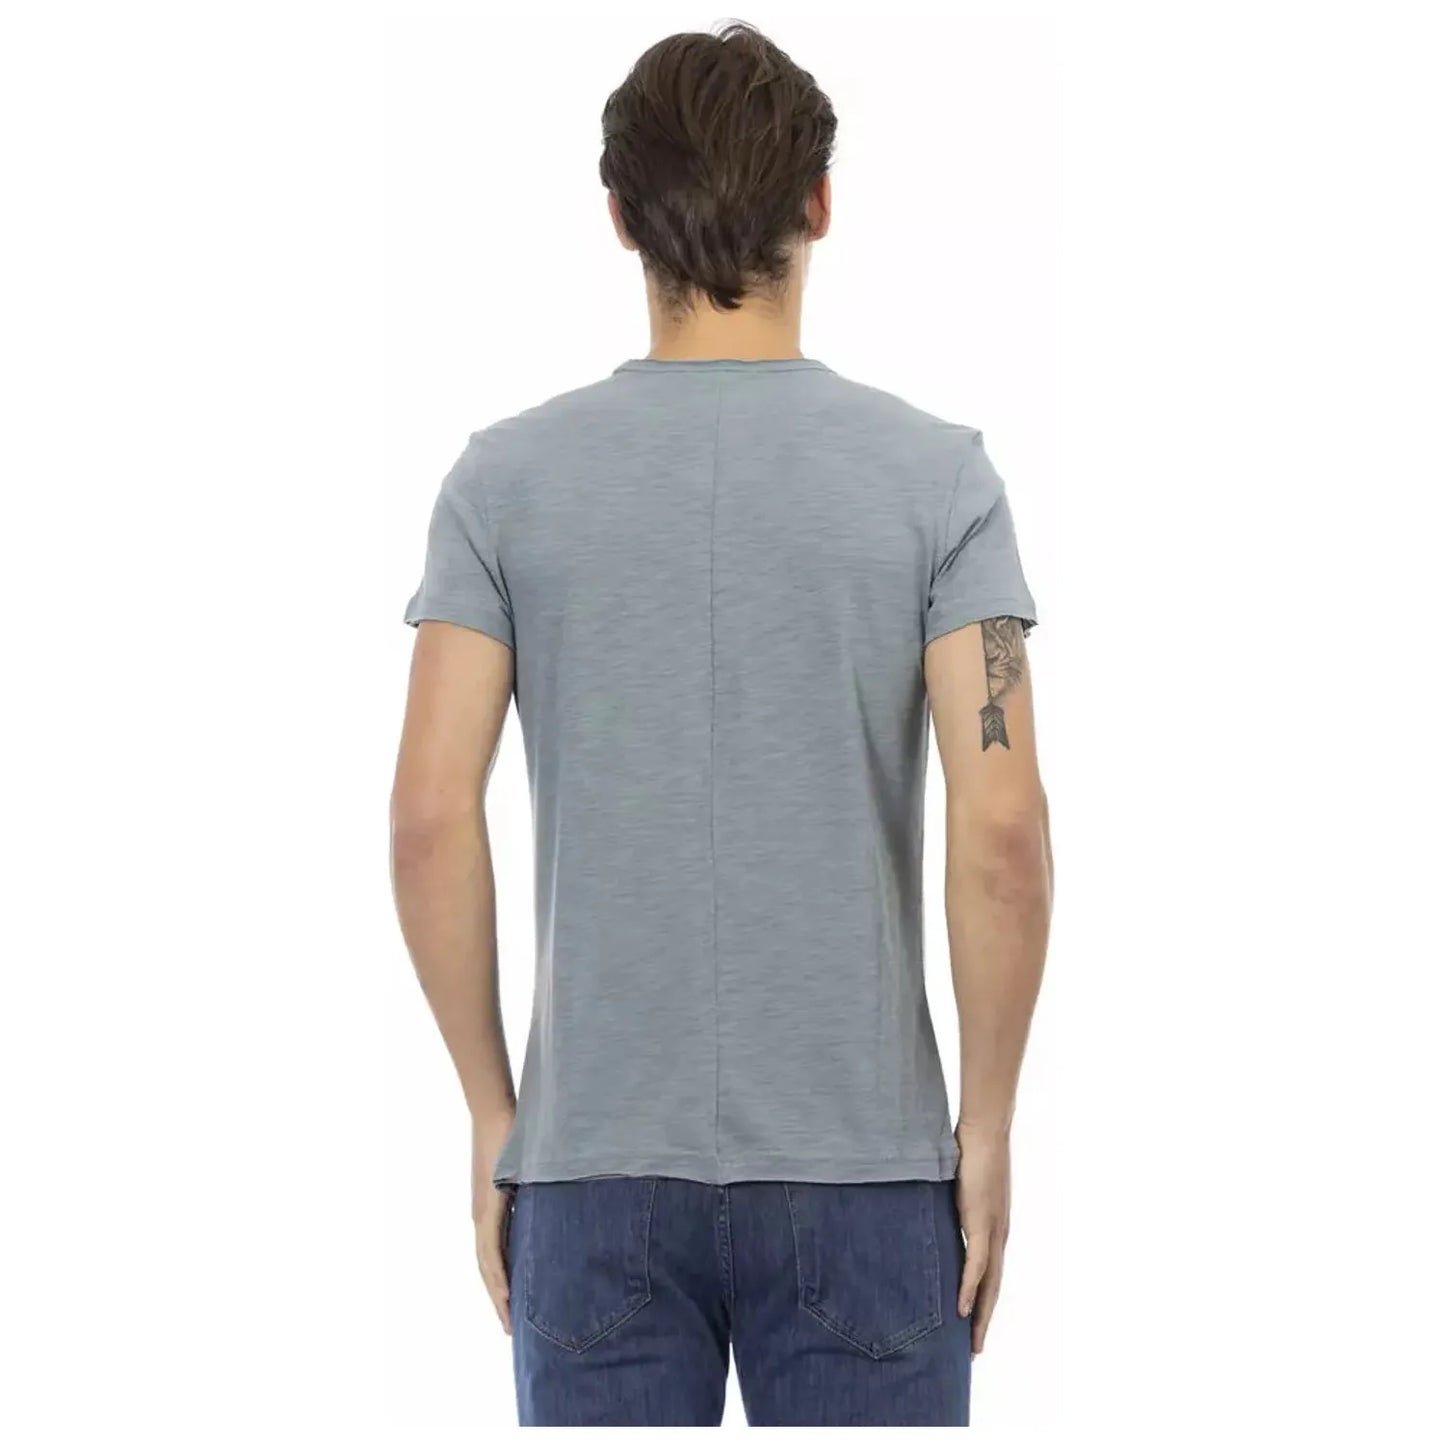 Trussardi Action Chic Gray Pocket Tee with Unique Print gray-cotton-t-shirt-32